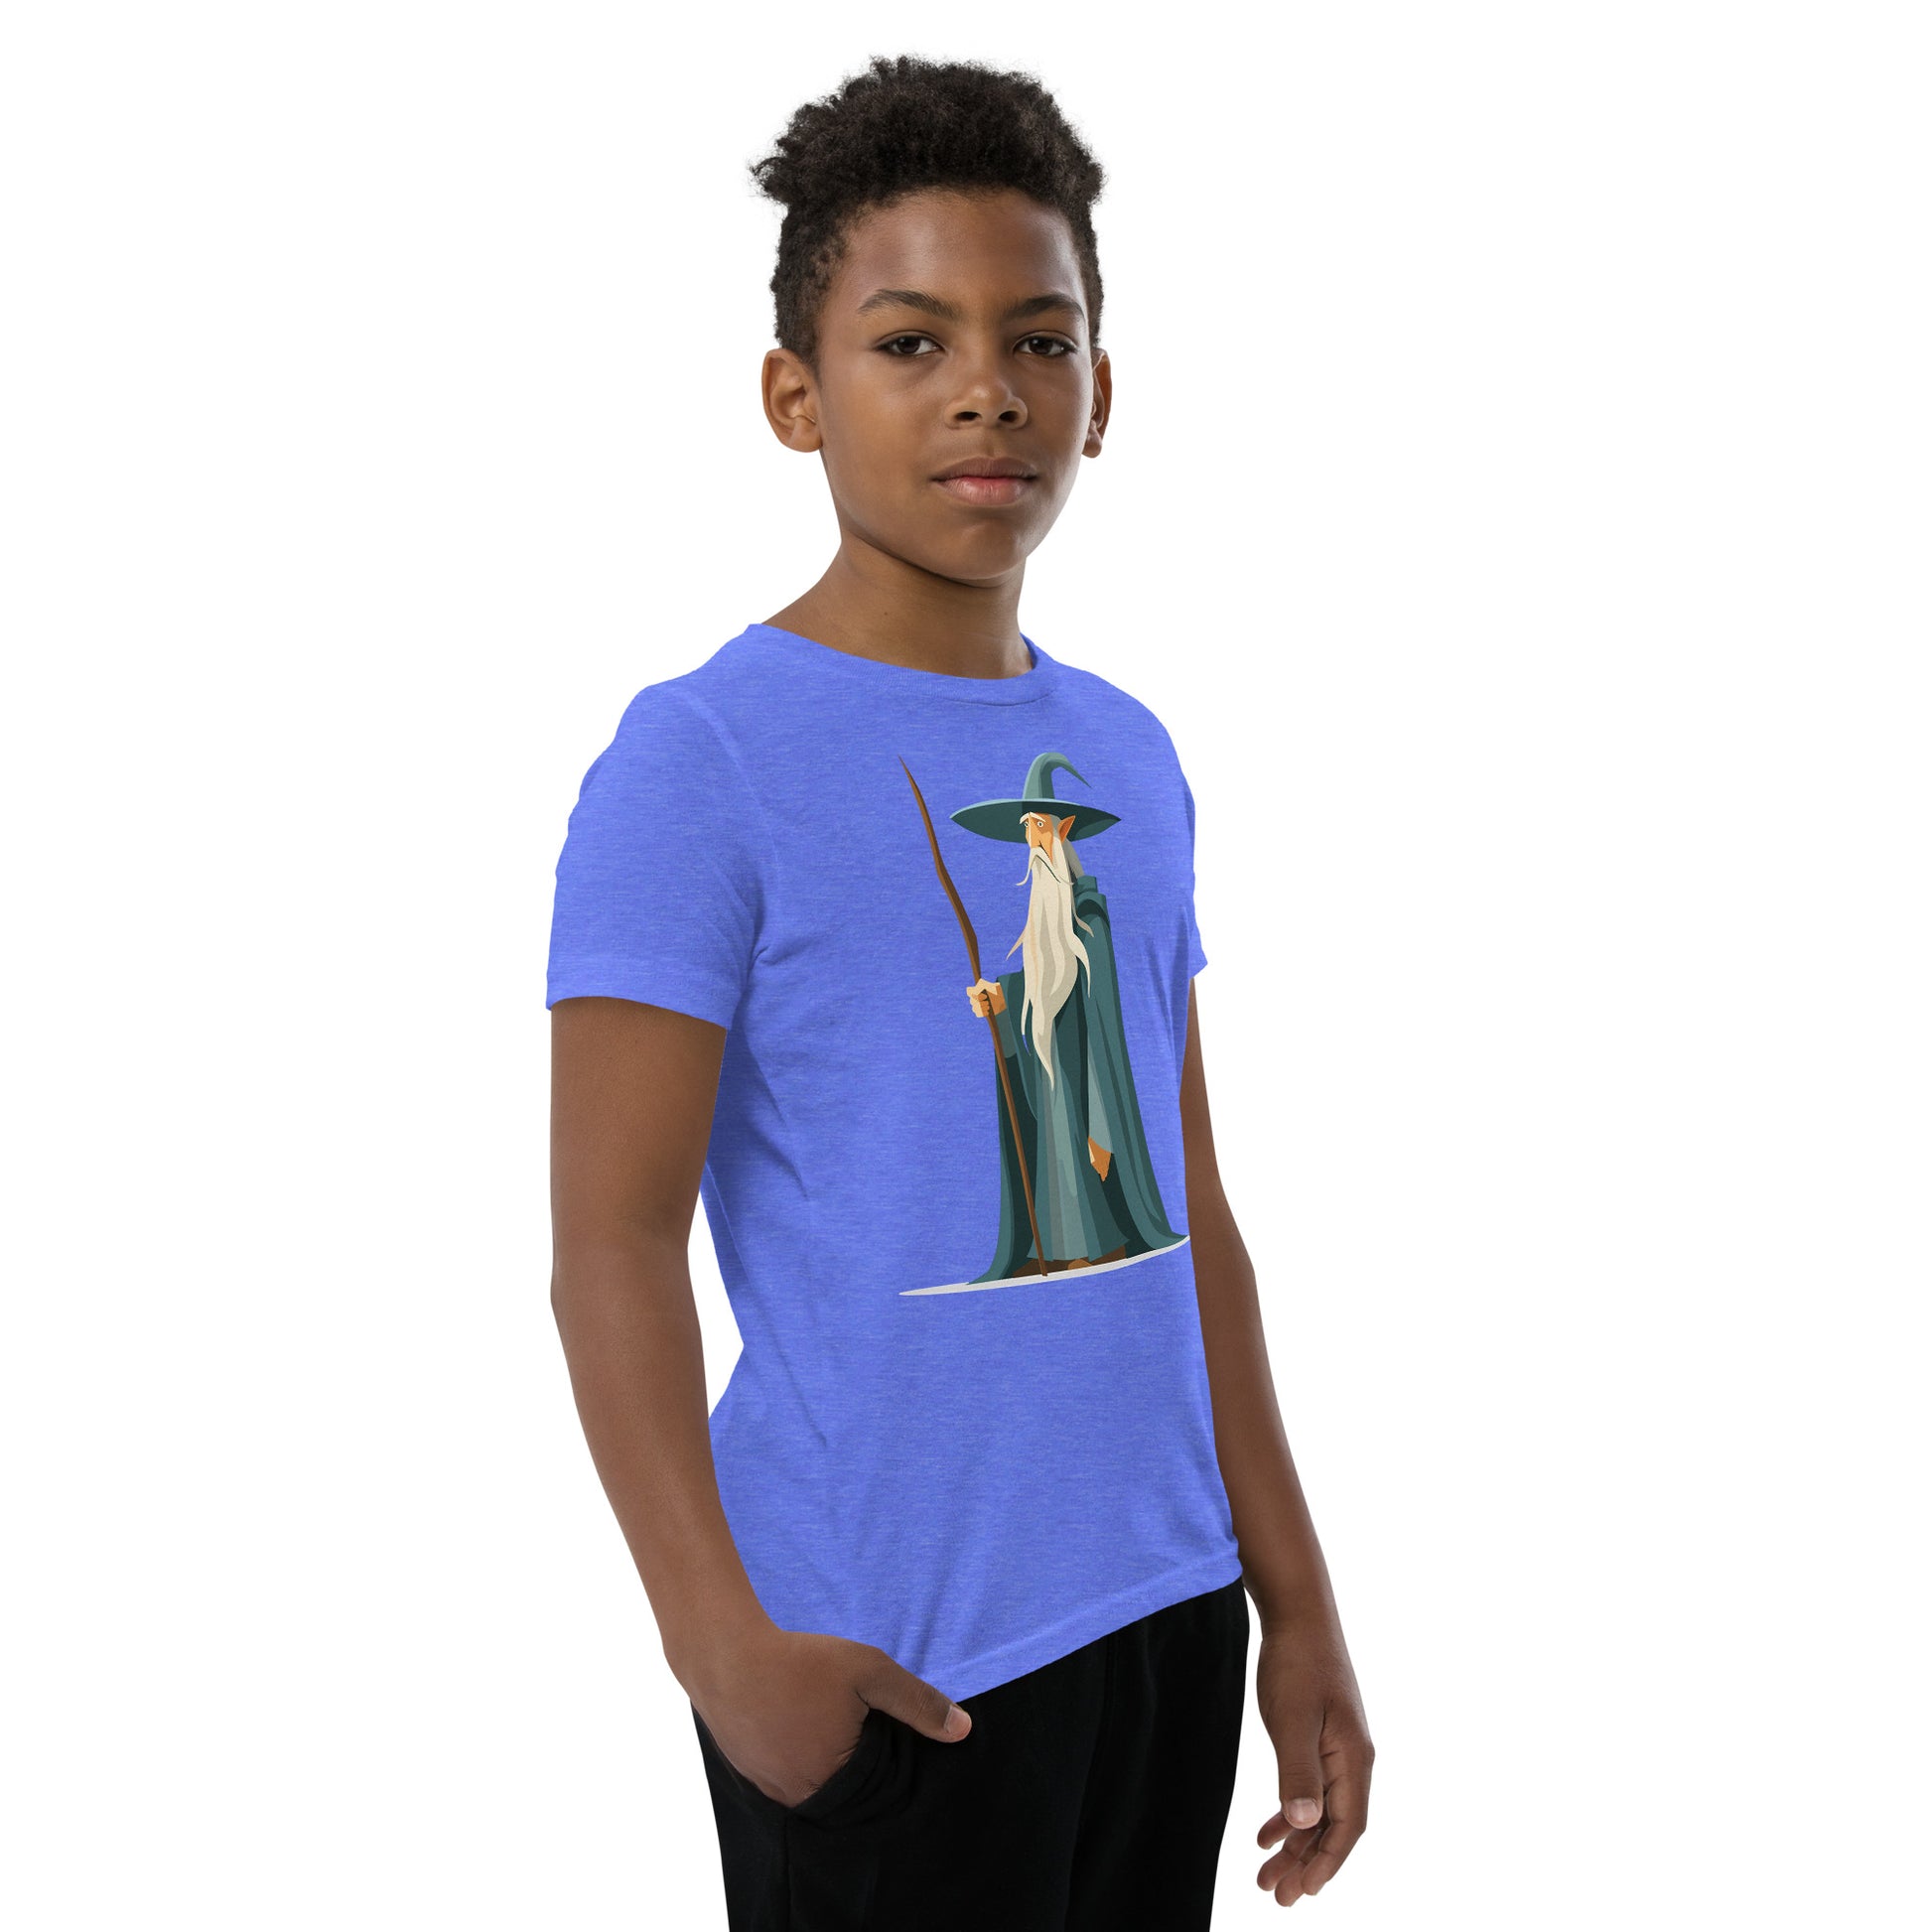 Boy with a columbia blue T-shirt with a picture of a magician